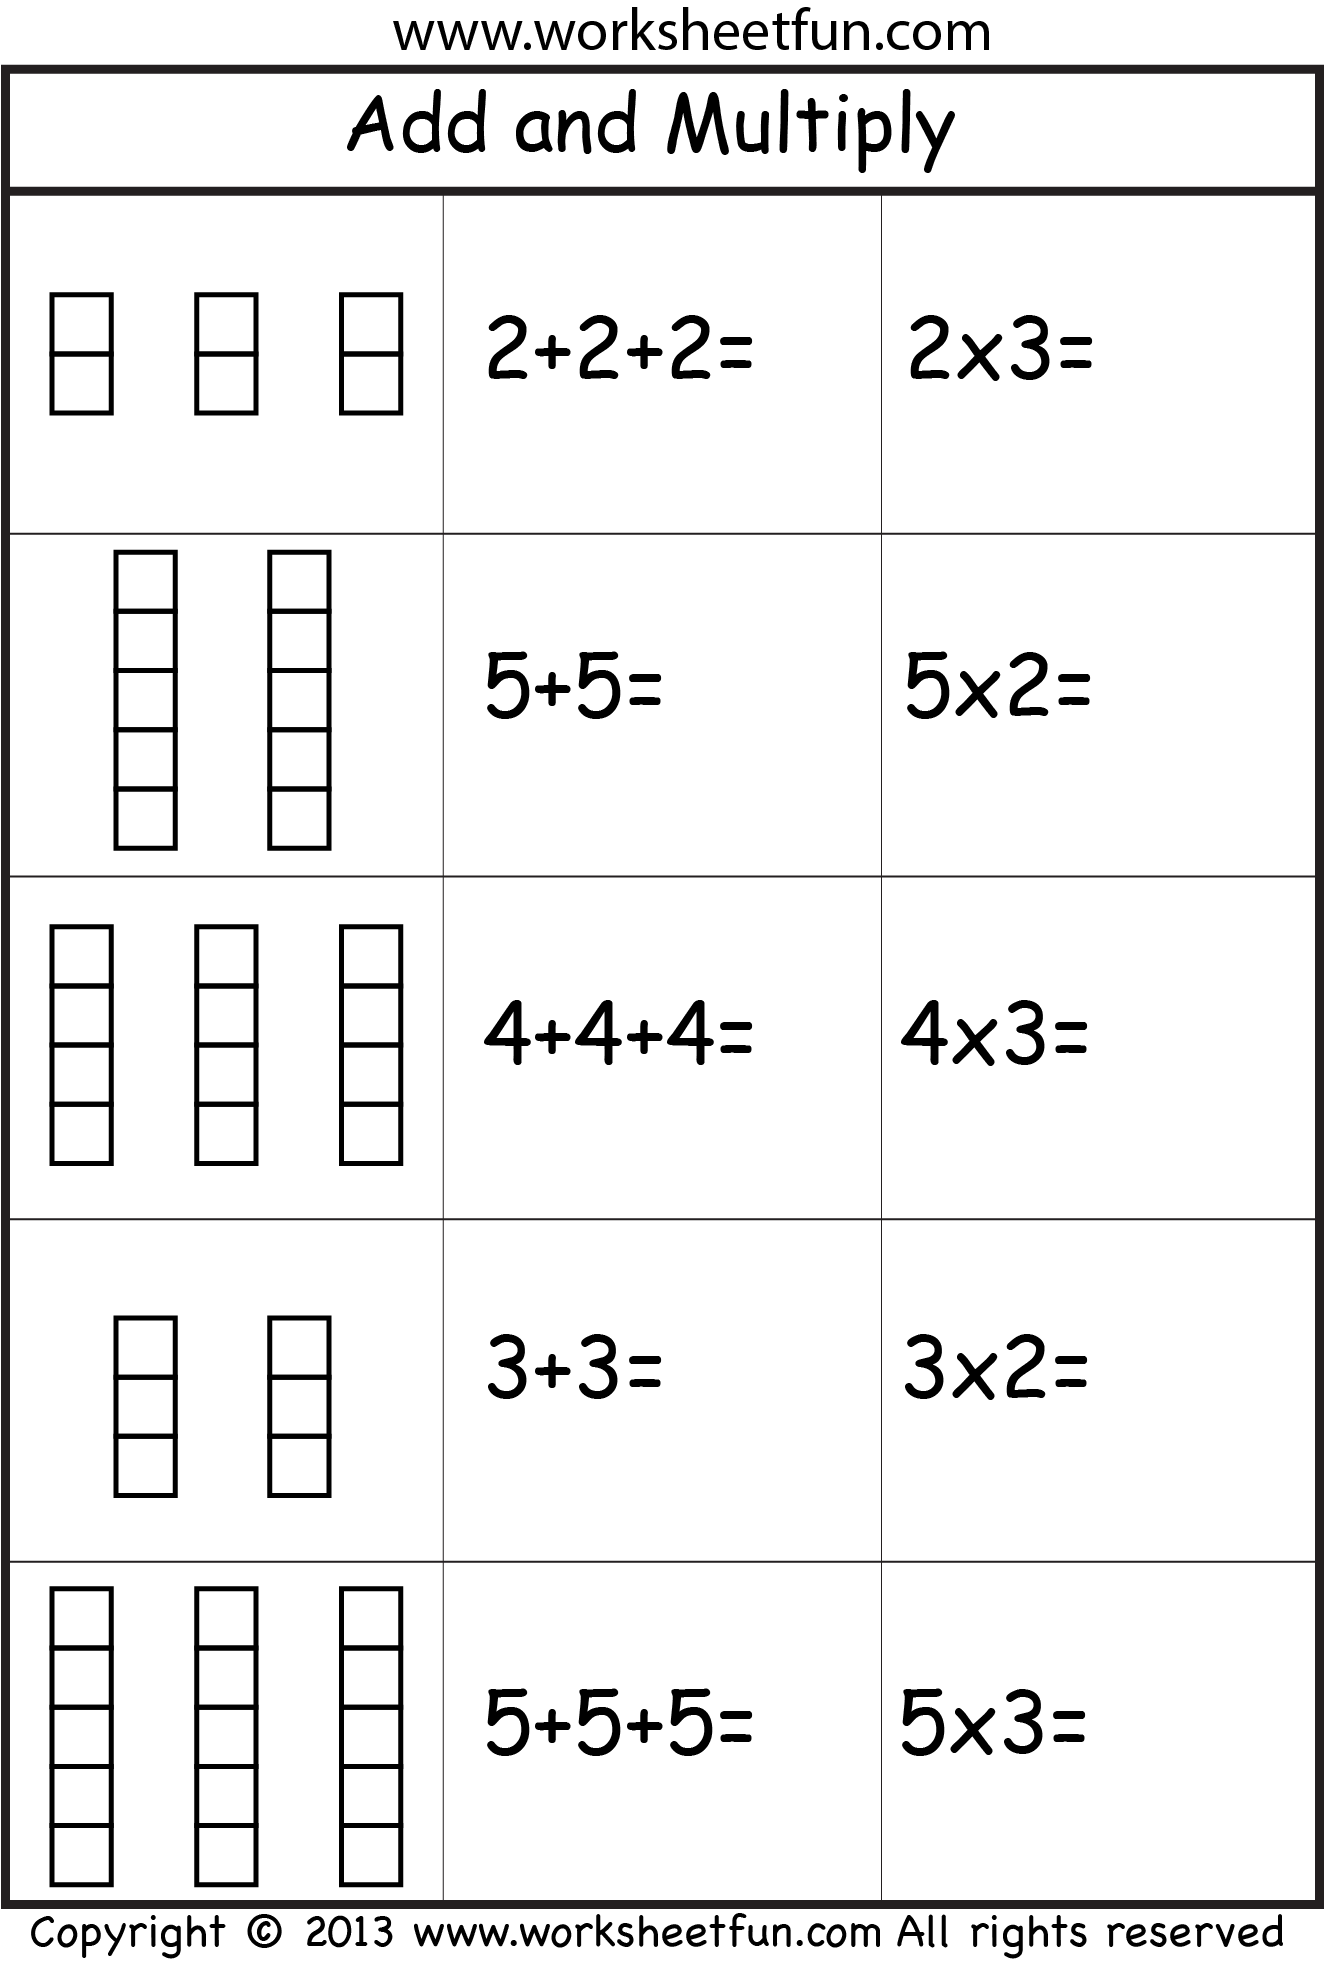 math-worksheets-addition-and-subtraction-addition-worksheets-addition-and-subtraction